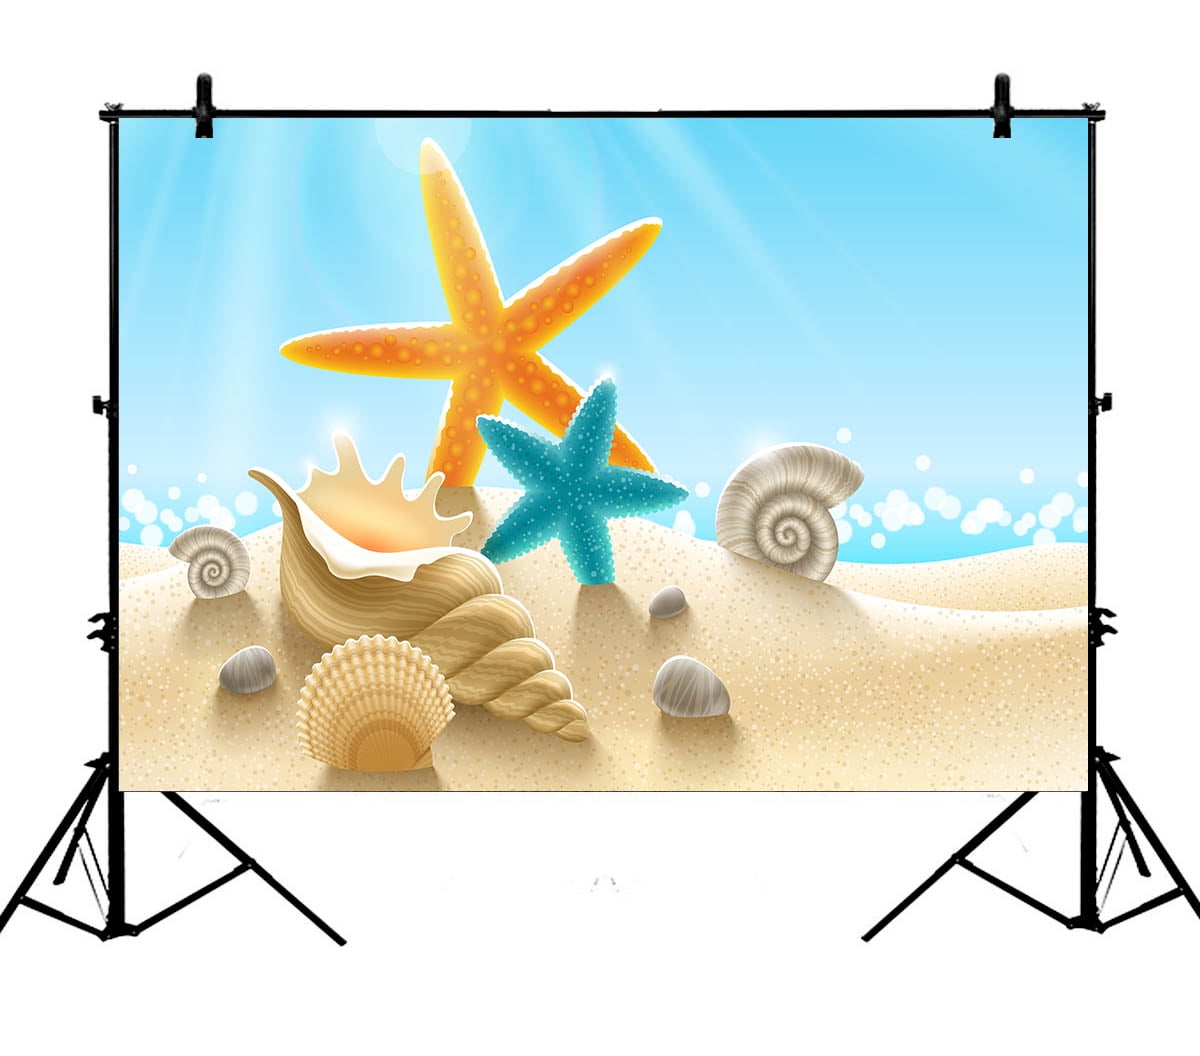 Kate 7x5ft Summer Holiday Party Seashell Photography Backdrops Sandy Beach Starfish Photo Background Photo Blue Sky White Cloud Backgrounds Baby Wedding Photoshoot Props